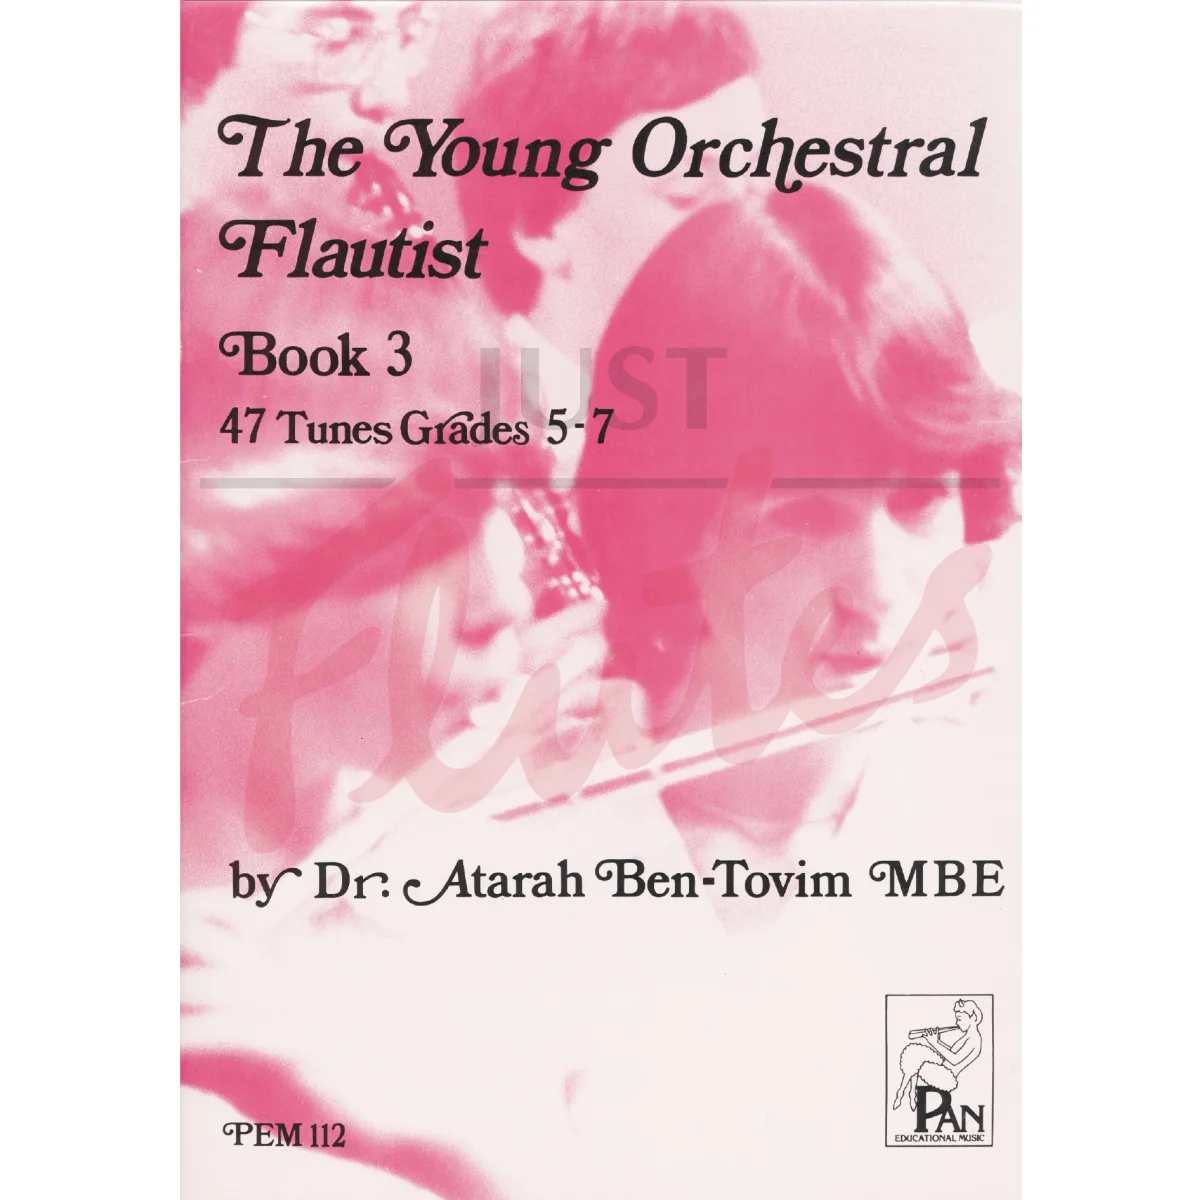 The Young Orchestral Flautist Book 3